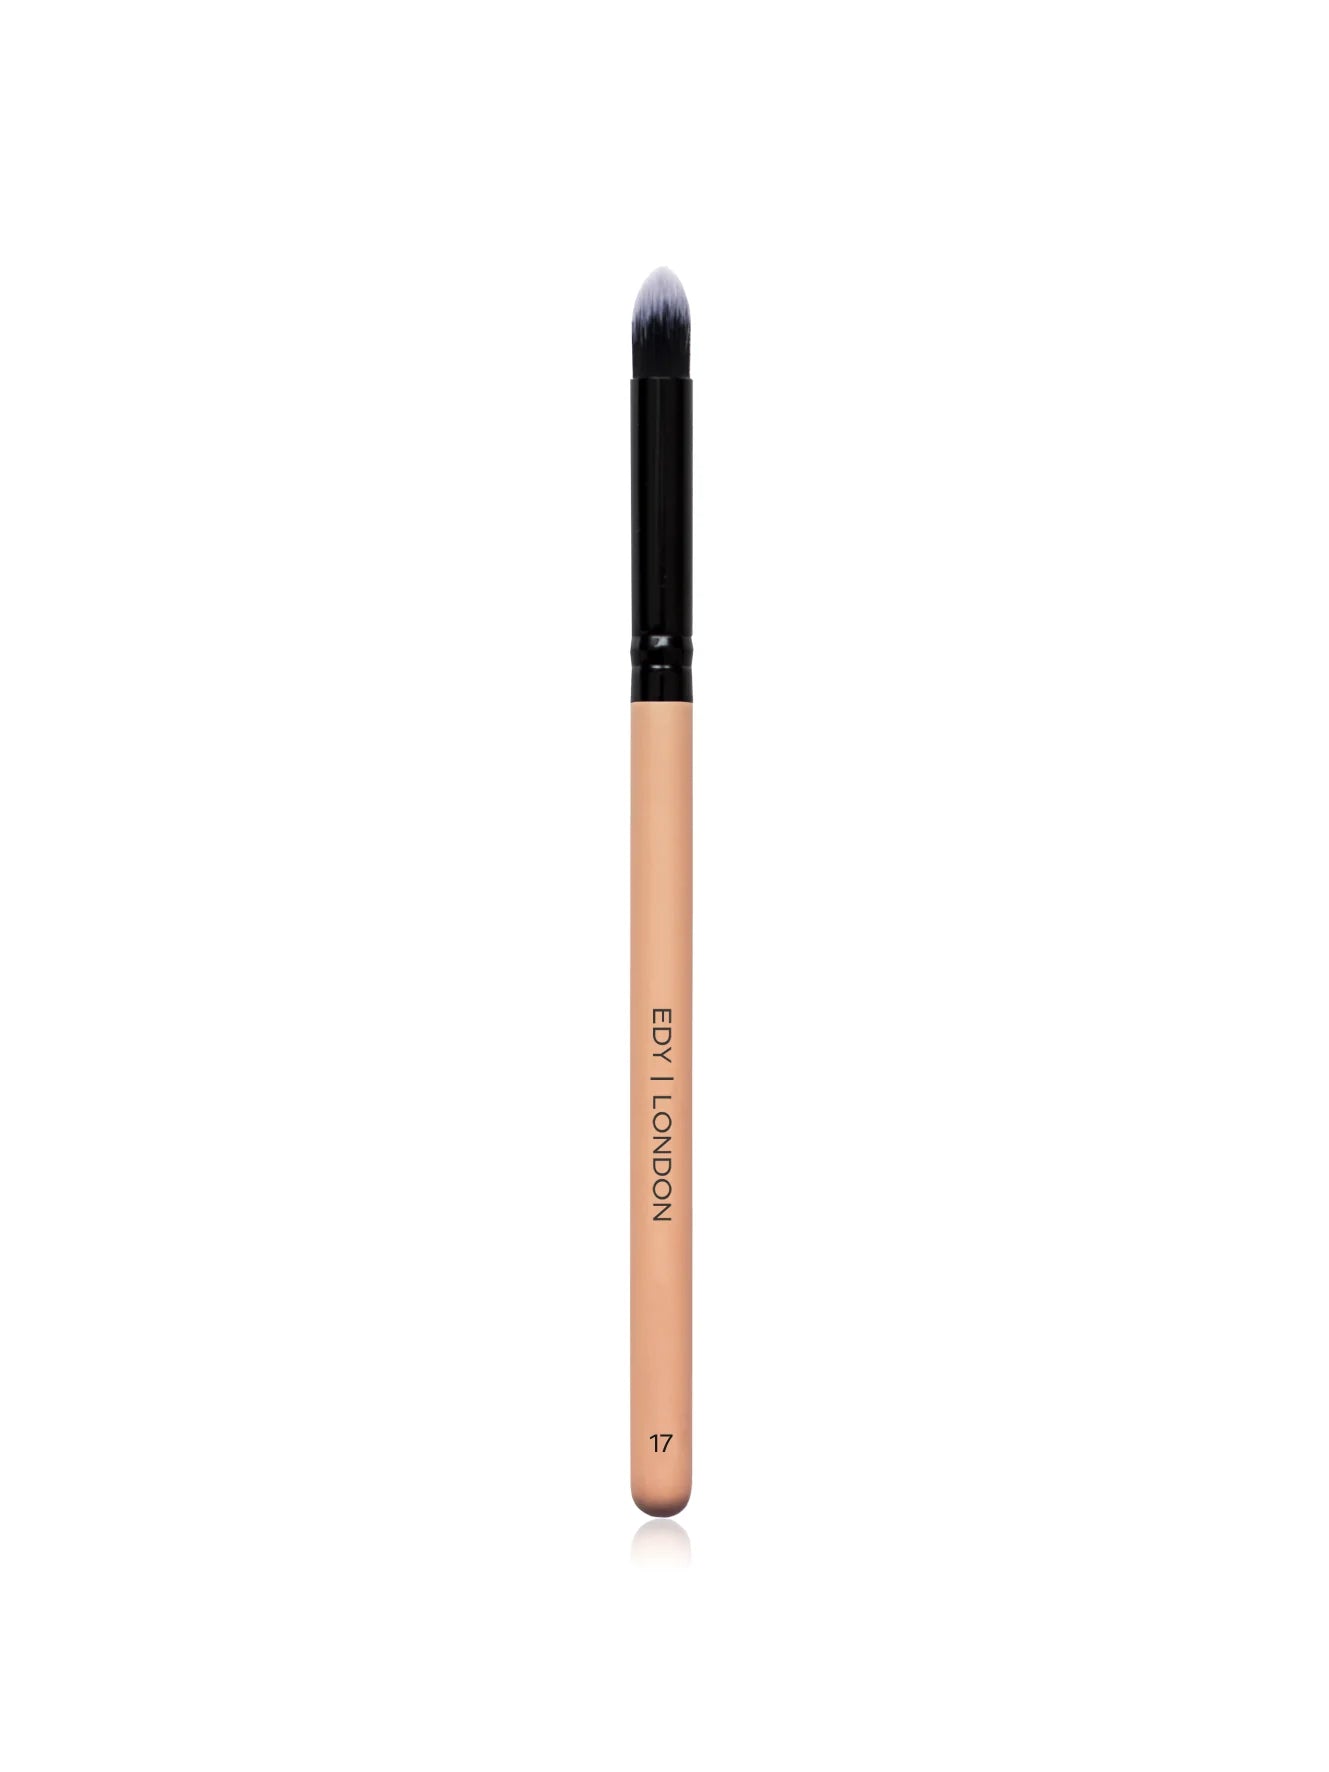 Tapered Crease Blender Brush 17 Make-up Brush EDY LONDON Pale Pink   - EDY LONDON PRODUCTS UK - The Best Makeup Brushes - shop.edy.london